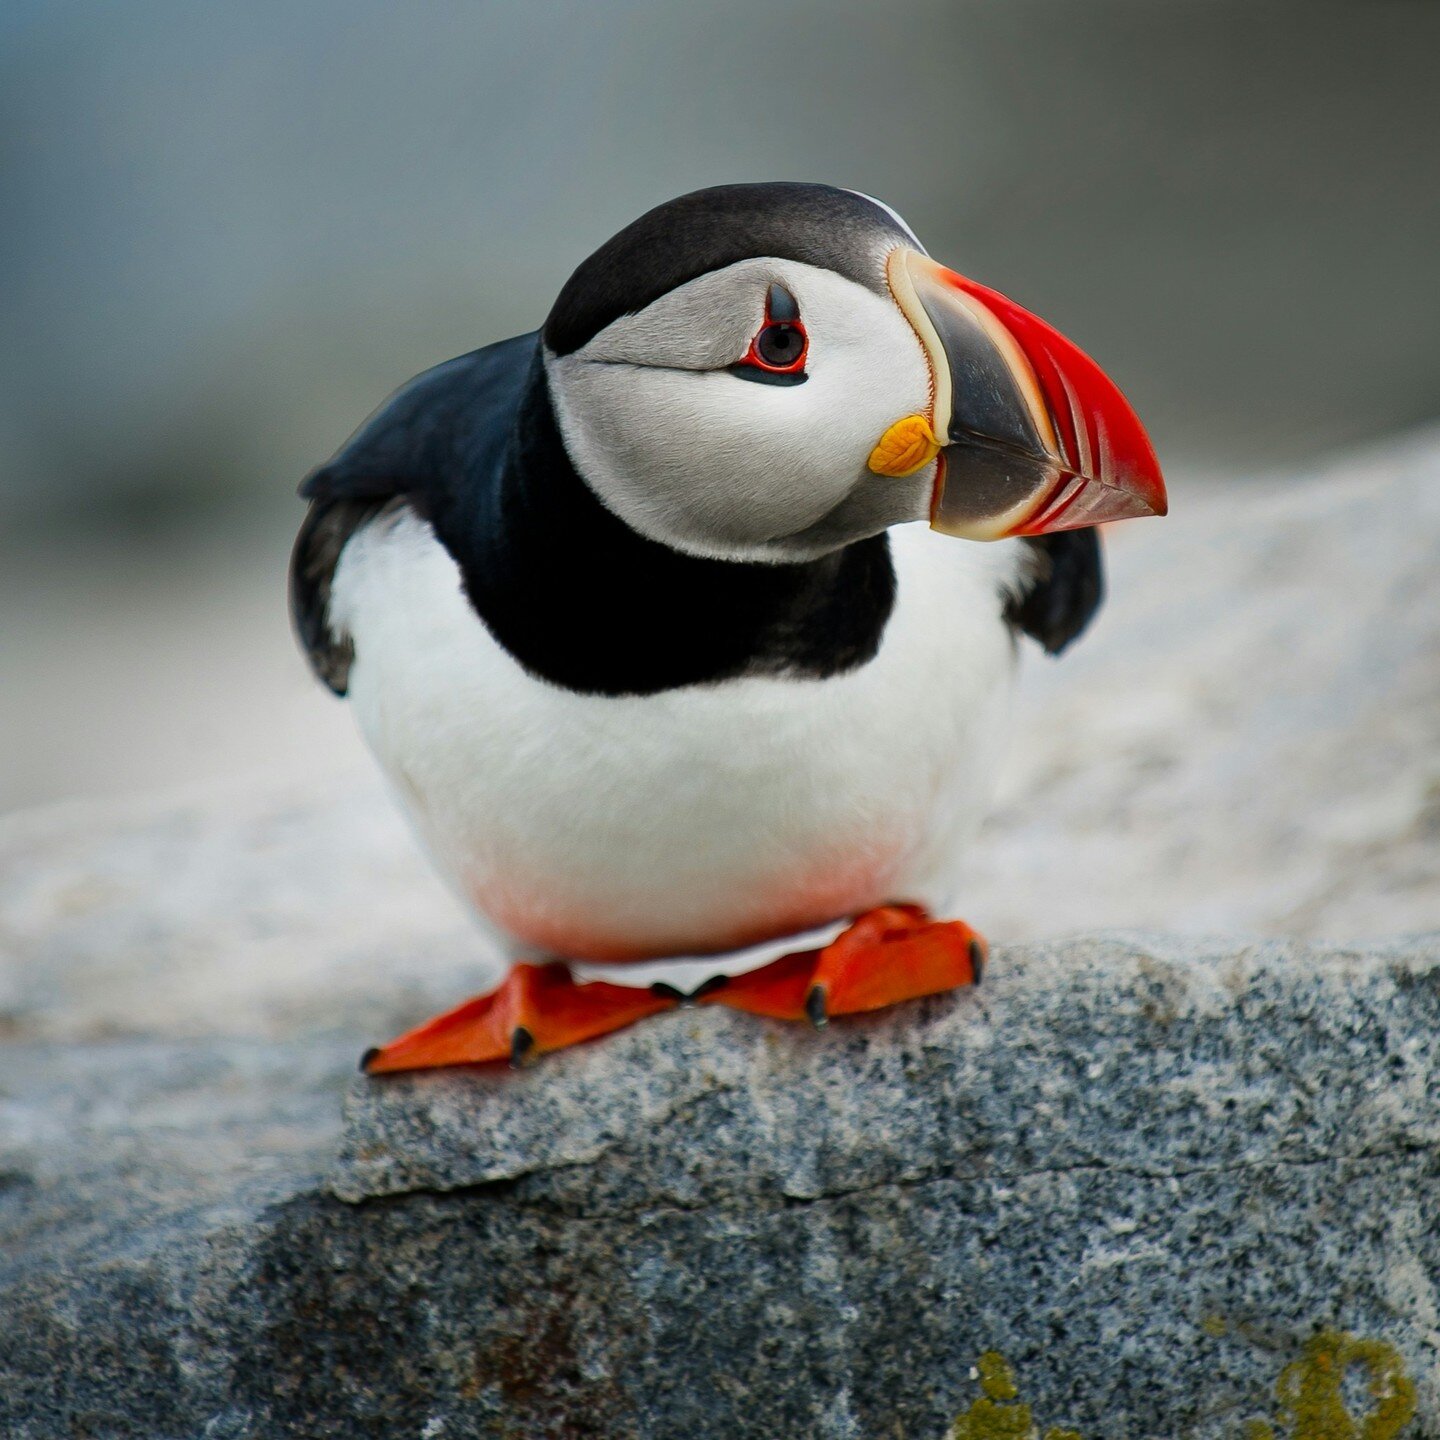 #Puffins are one of #Scotland's most beloved #seabirds. These cute and colorful #creatures are known for their distinctive appearance, with their brightly colored beaks and eye-catching plumage. They can be found in various locations throughout Scotl